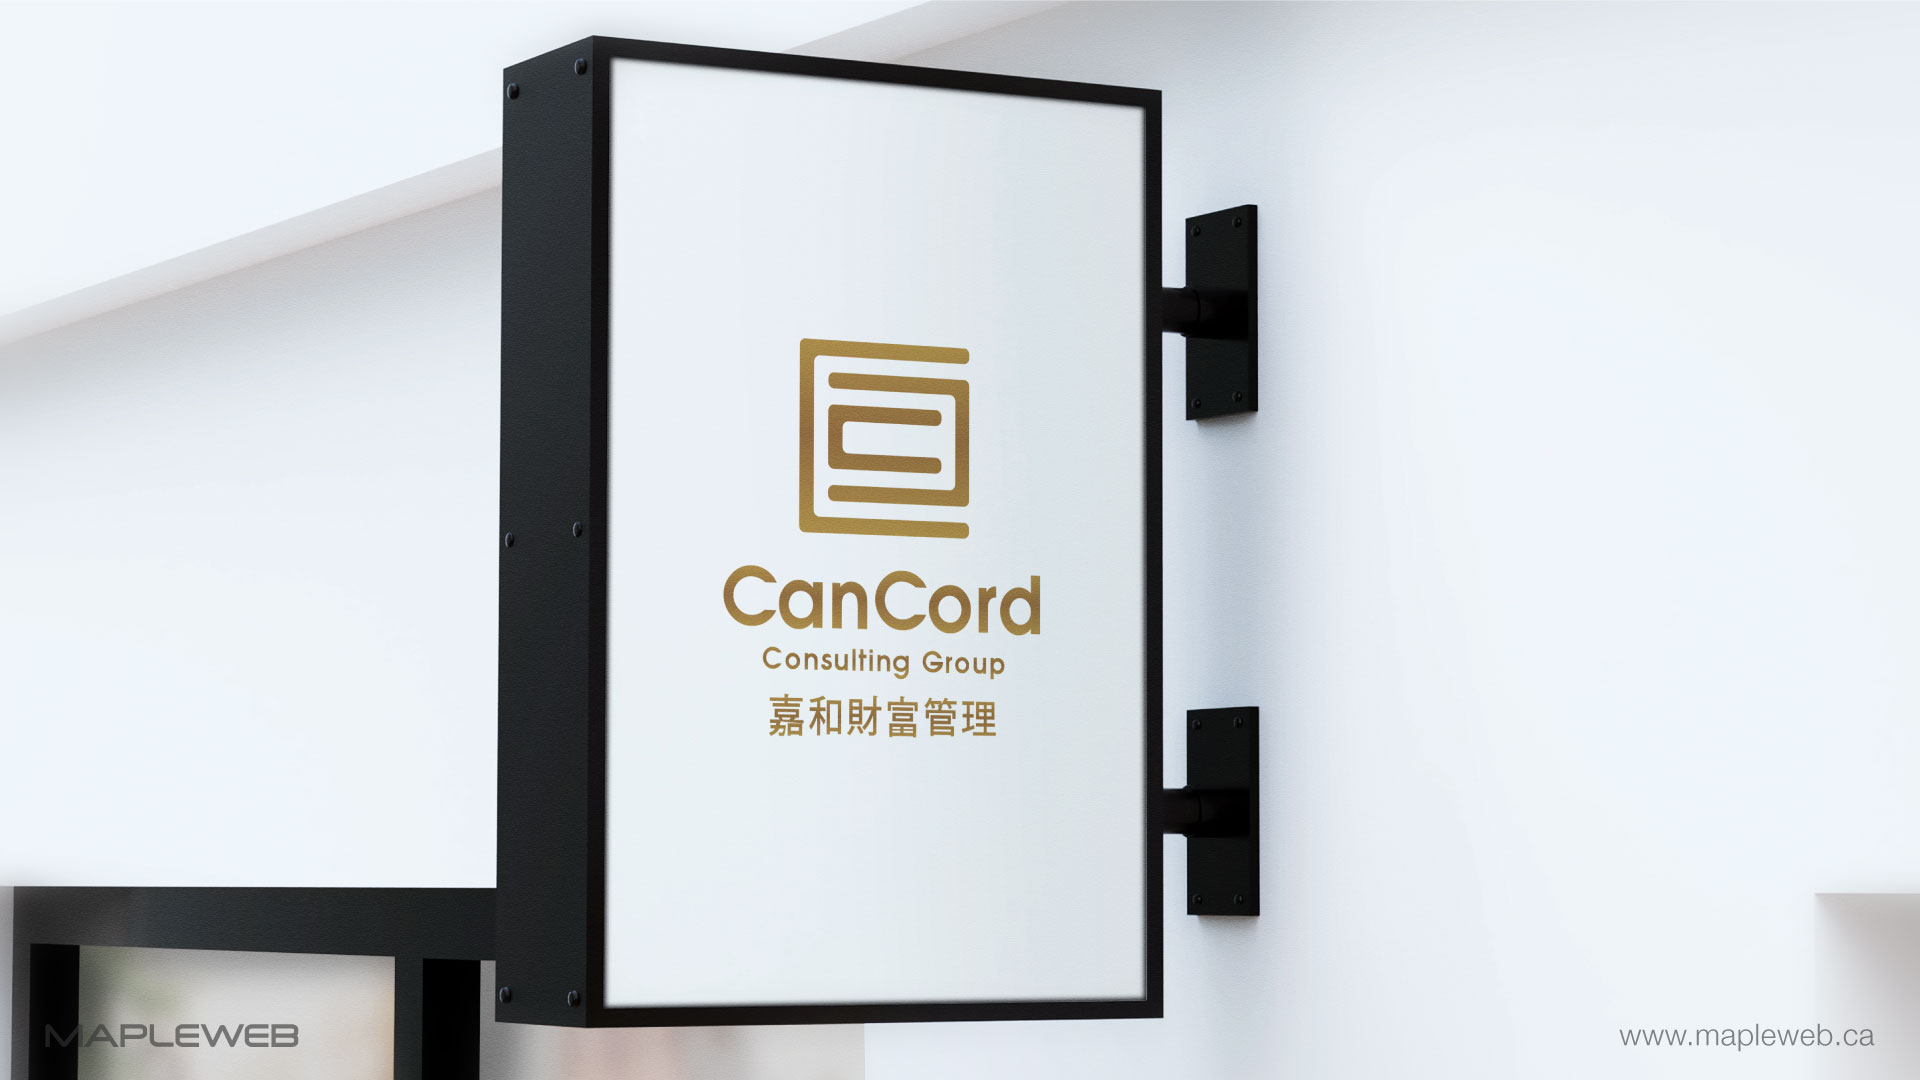 cancord-consulting-group-brand-logo-design-by-mapleweb-vancouver-canada-shop-outside-mock